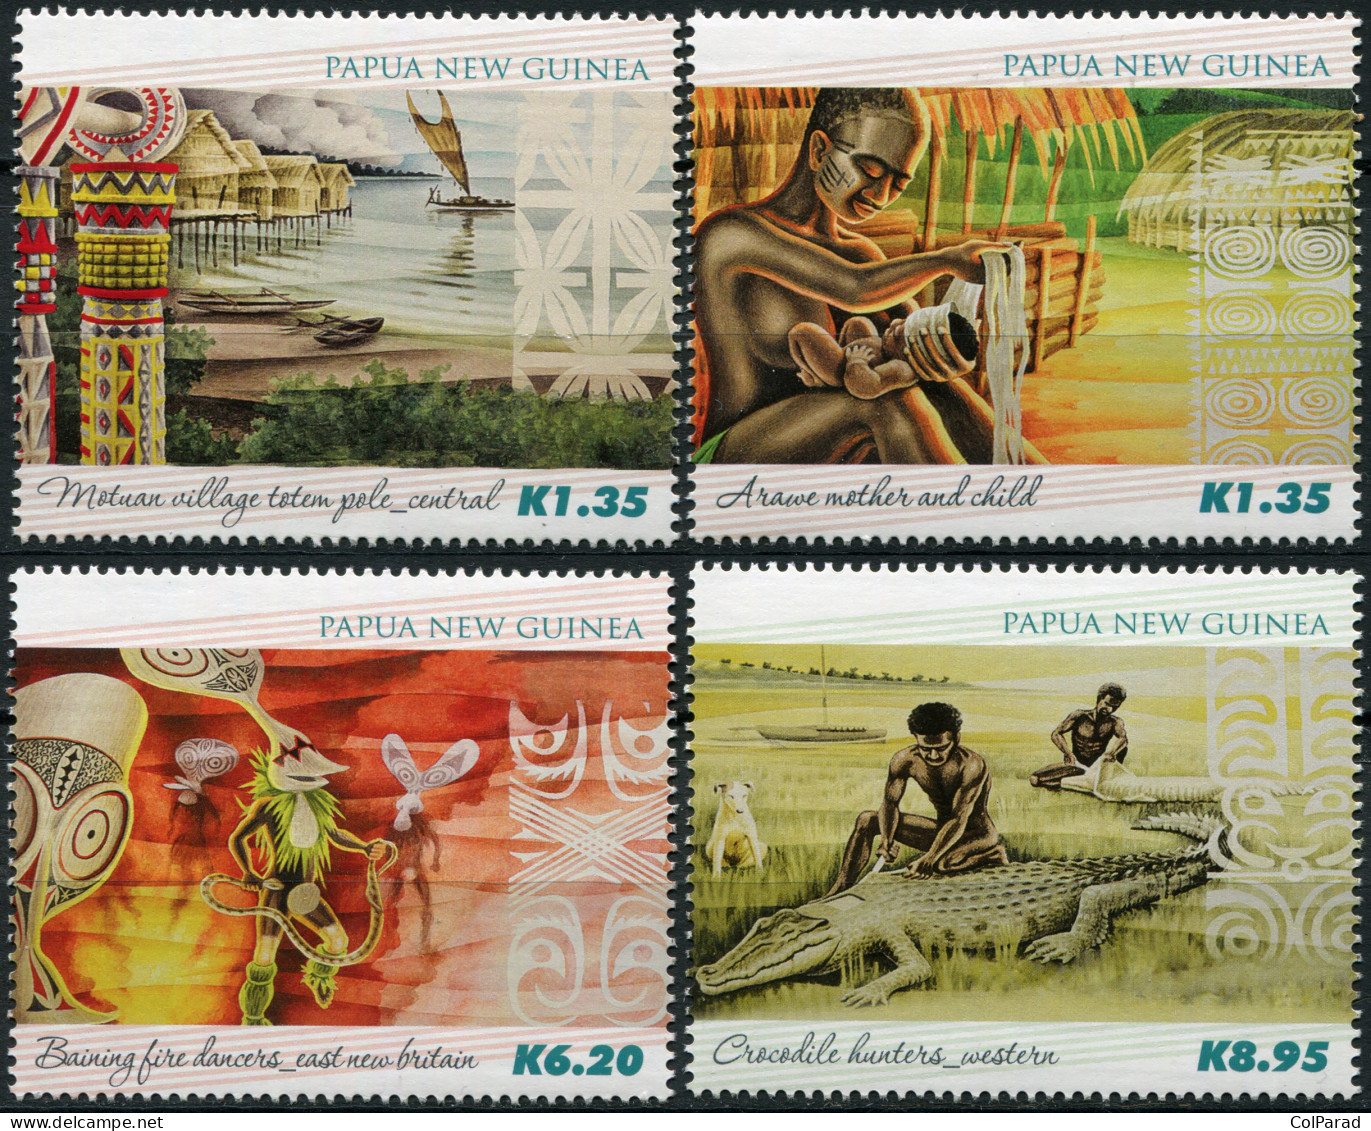 PAPUA NEW GUINEA - 2015 - SET OF 4 STAMPS MNH ** - Traditional Paintings - Papua New Guinea